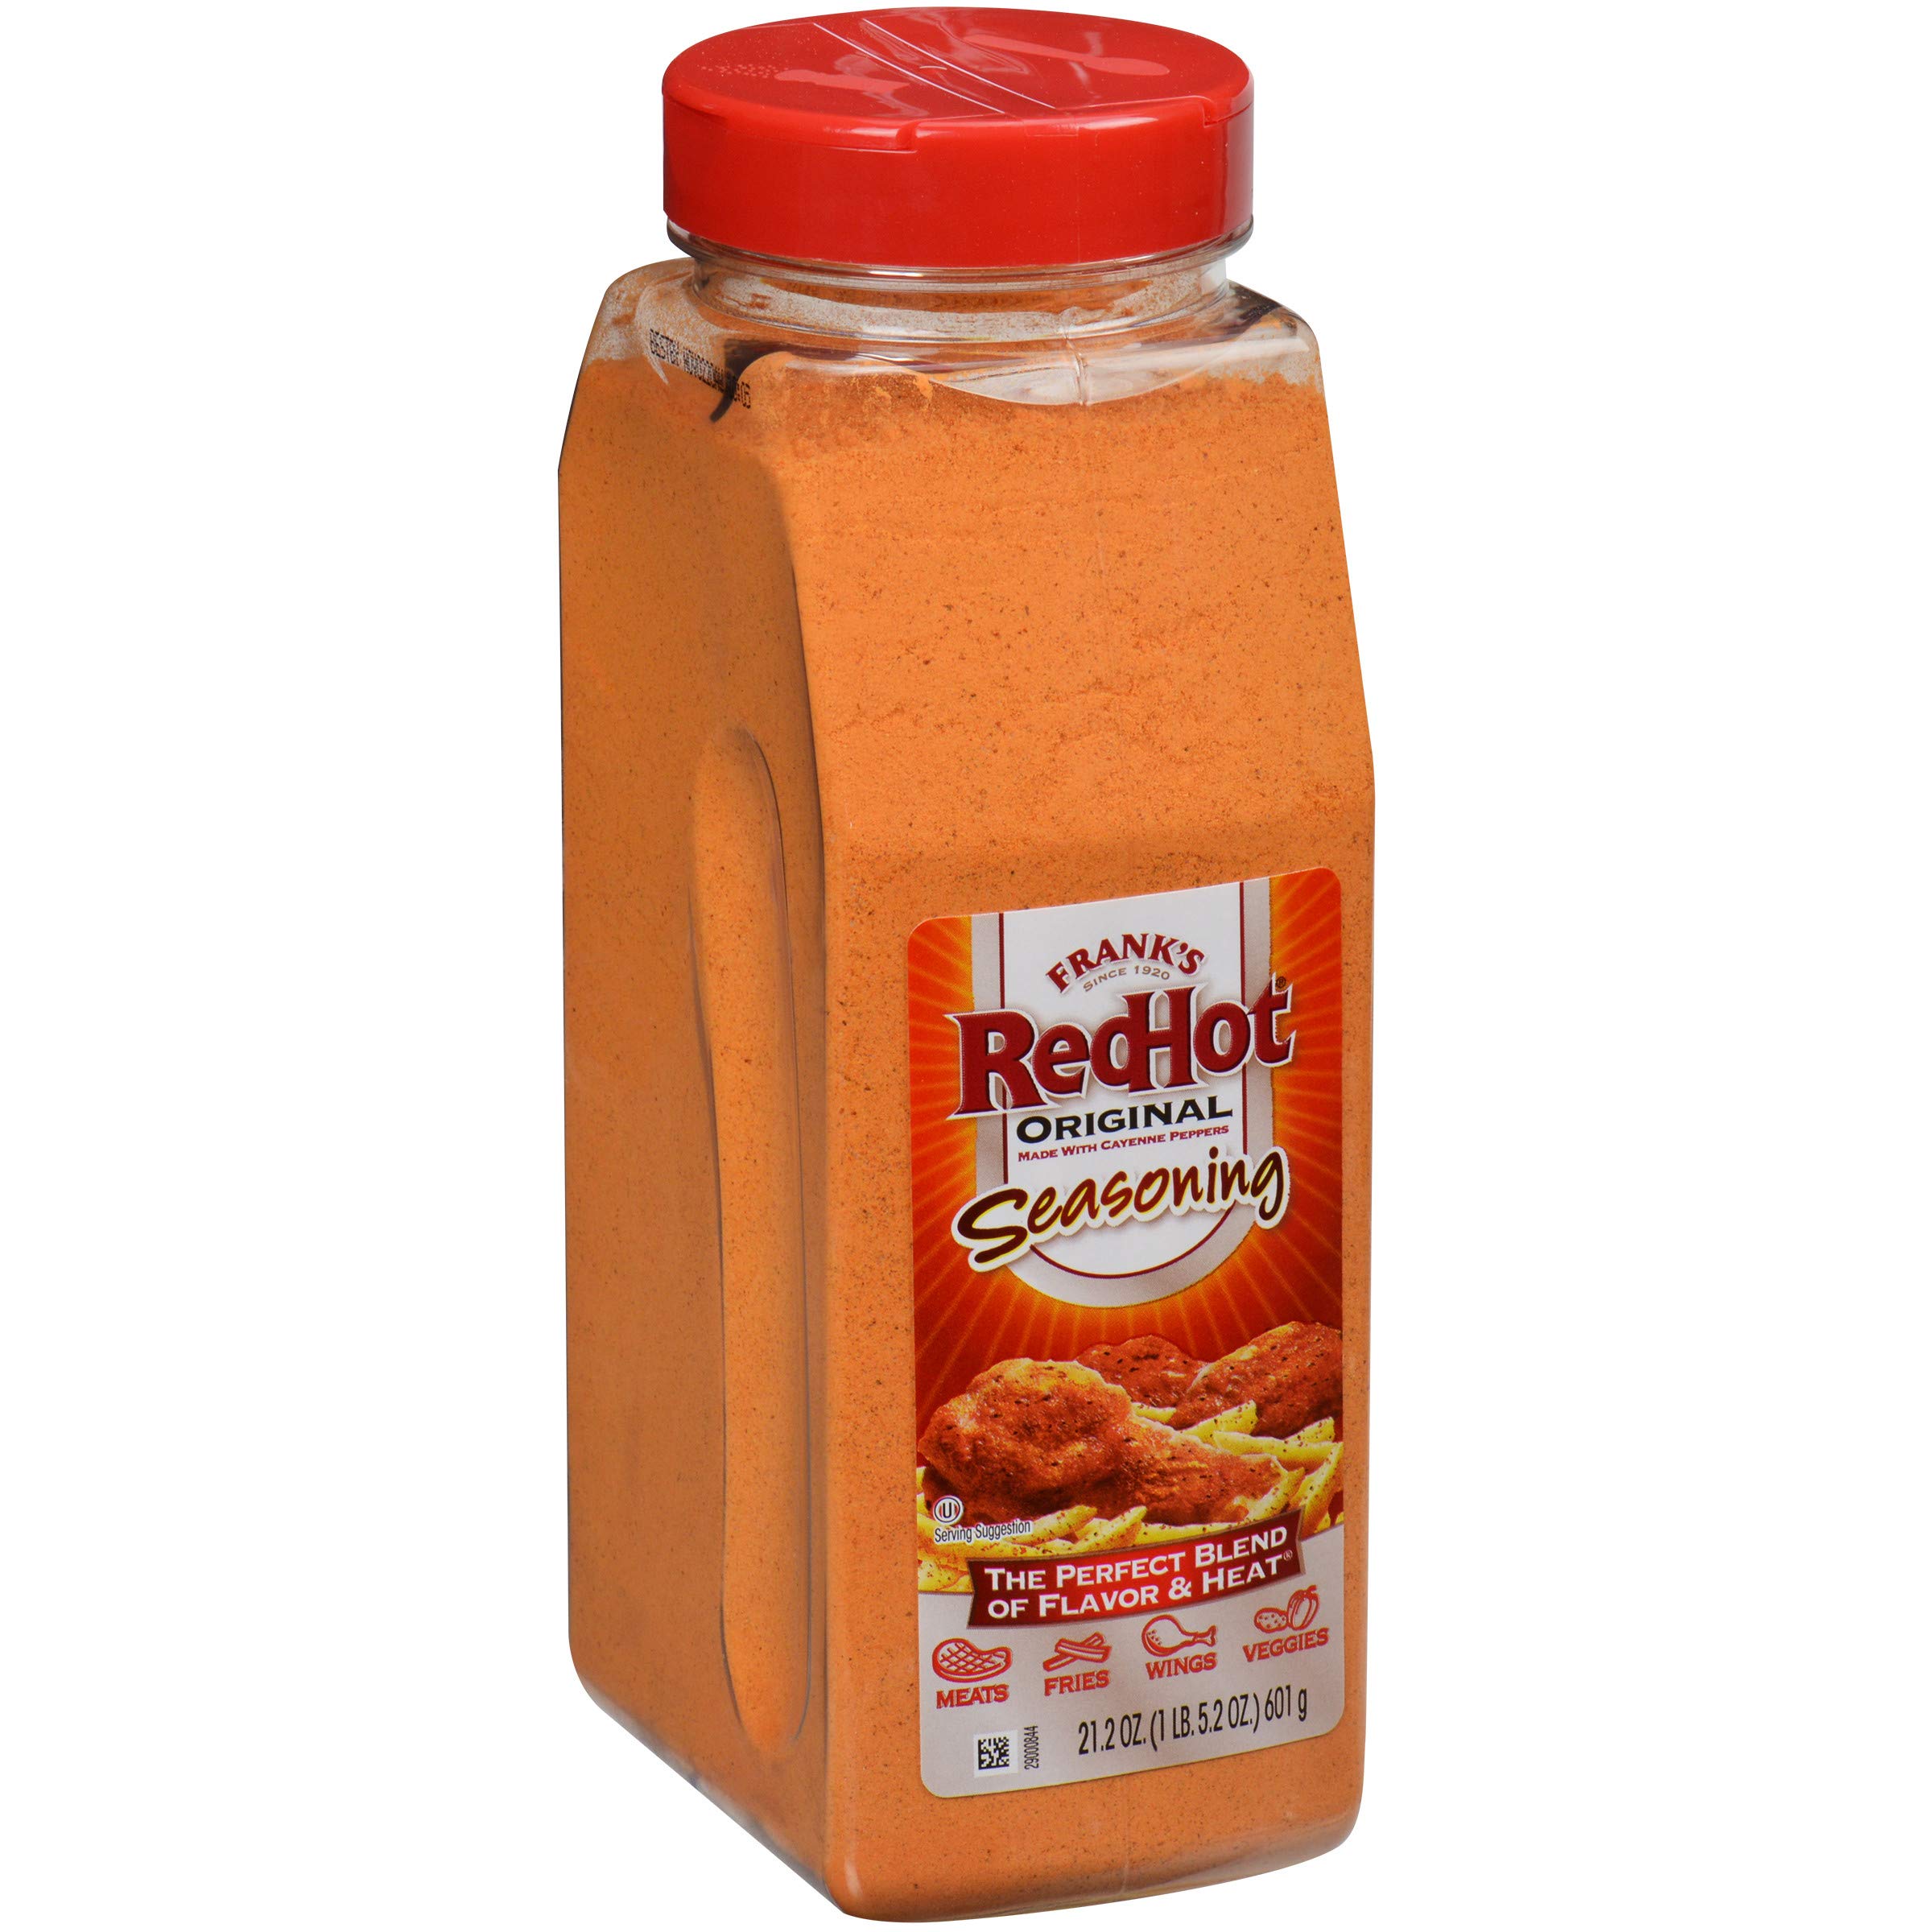 Frank's RedHot Original Seasoning, 21.2 oz - One 21.2 Ounce Container of Hot  Sauce Seasoning Blend of Savory Garlic and Spicy Cayenne Pepper, Perfect  for Dry-Rubs 1.32 Pound (Pack of 1)